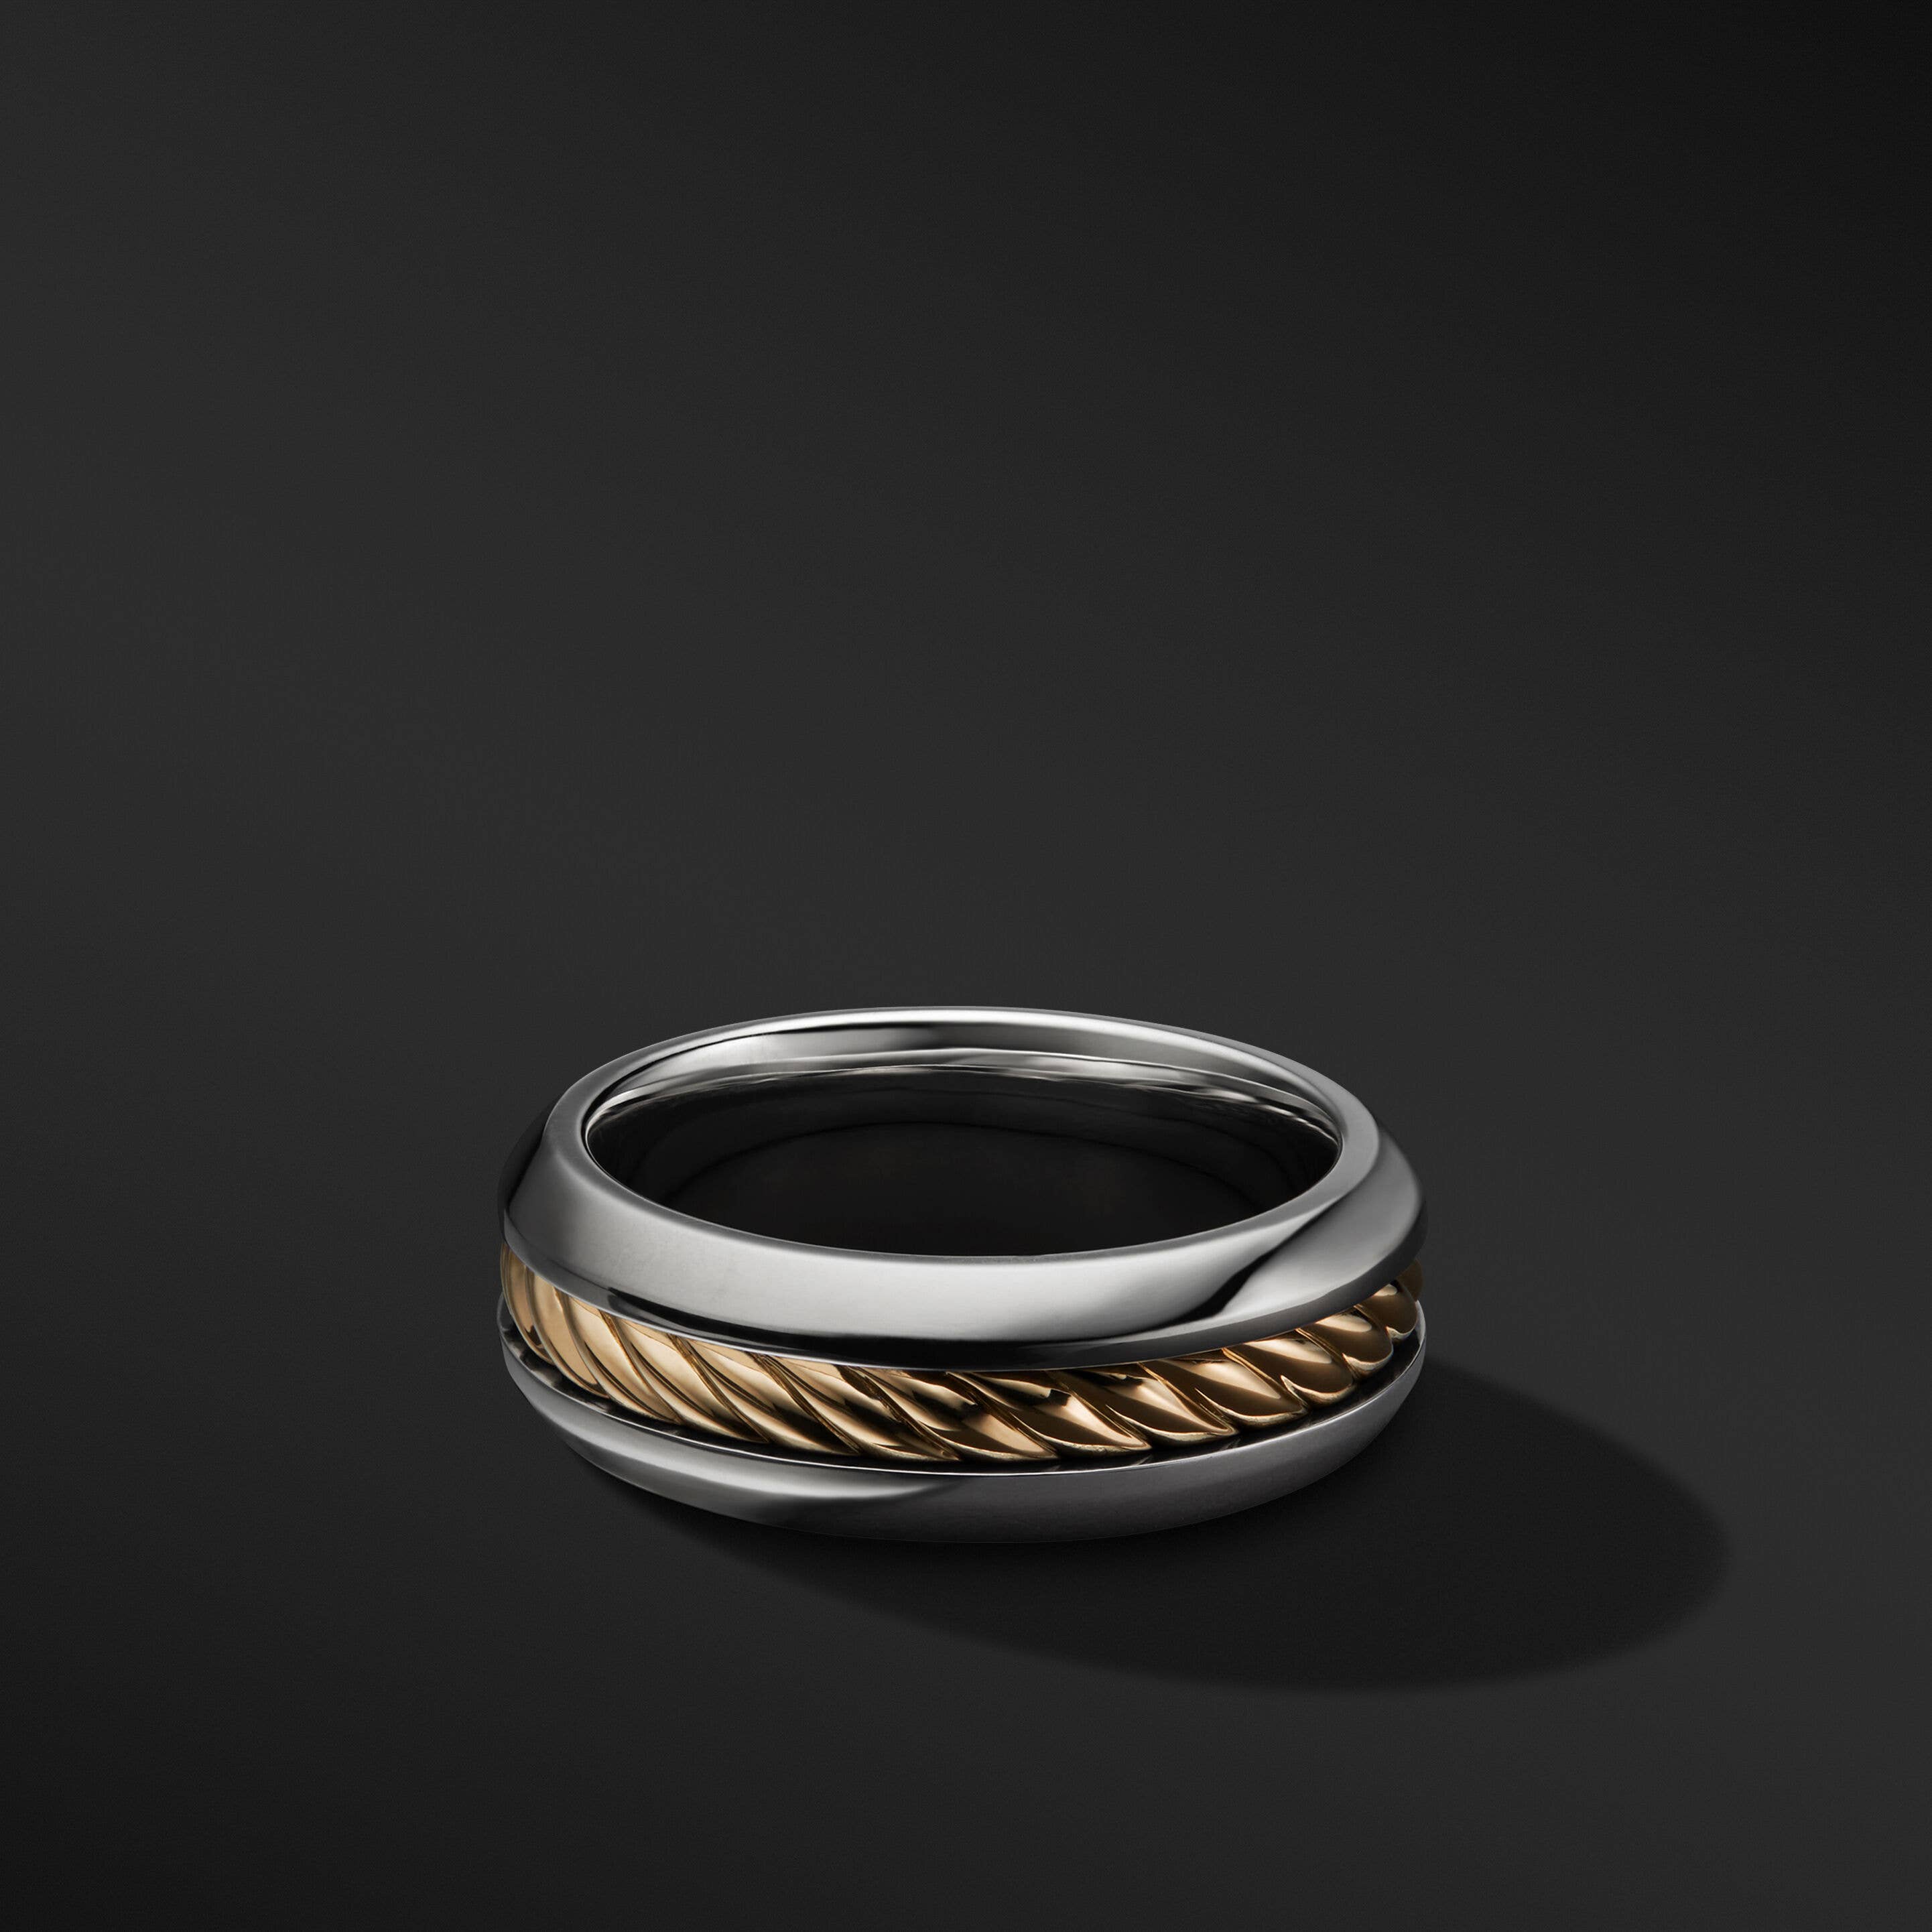 Cable Inset Band Ring with 18K Yellow Gold